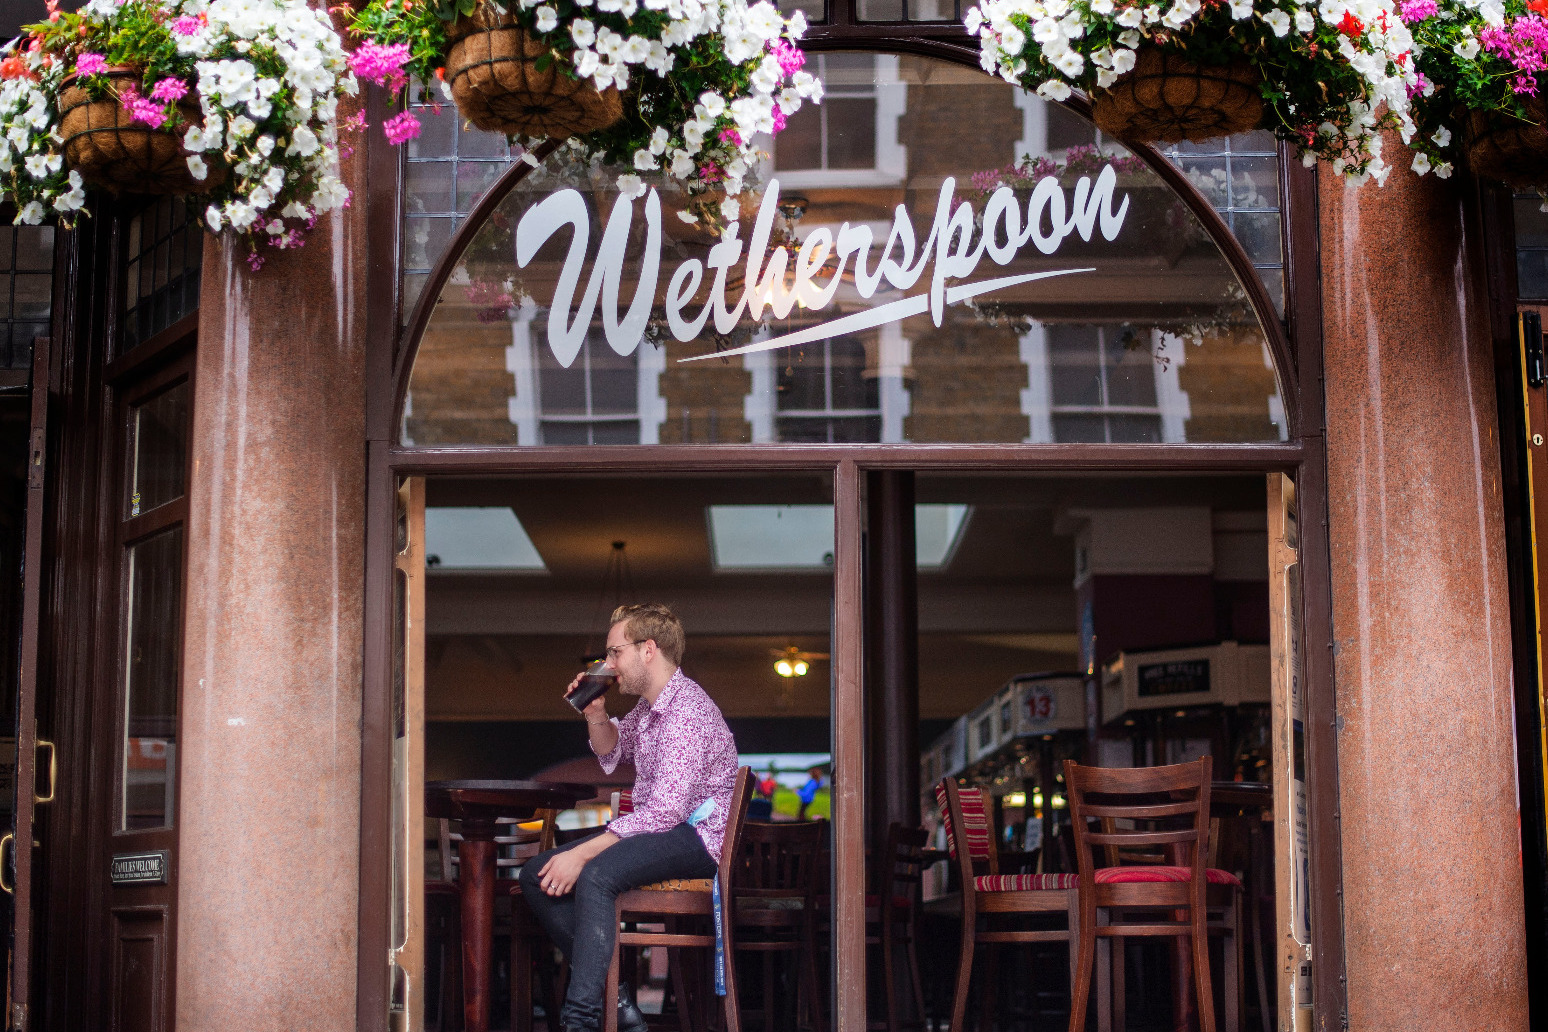 Pub chain Wetherspoon reveals jump in sales as boss warns about costs 